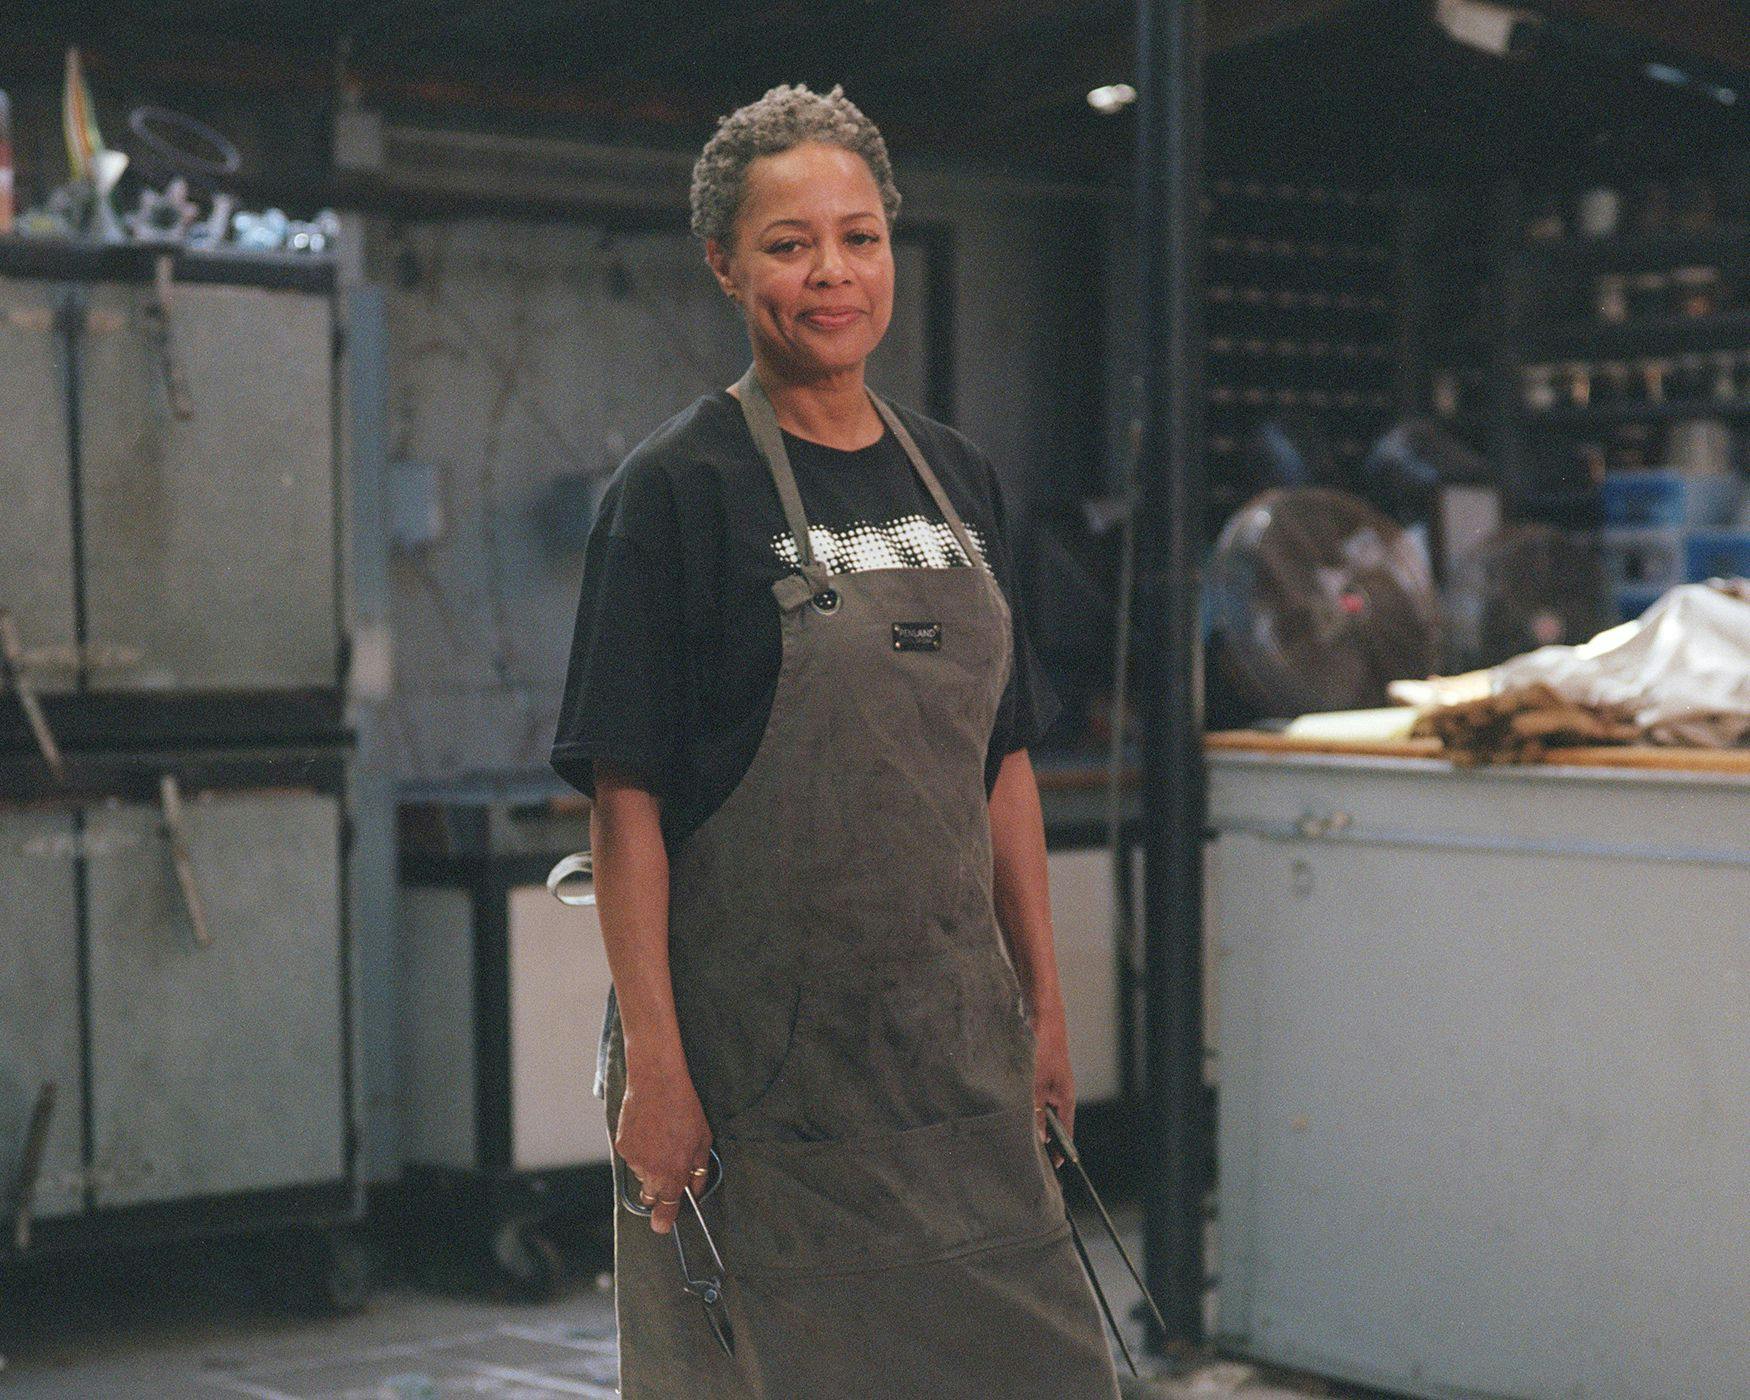 A woman with short grey hair wears a work apron in an industrial-looking art studio